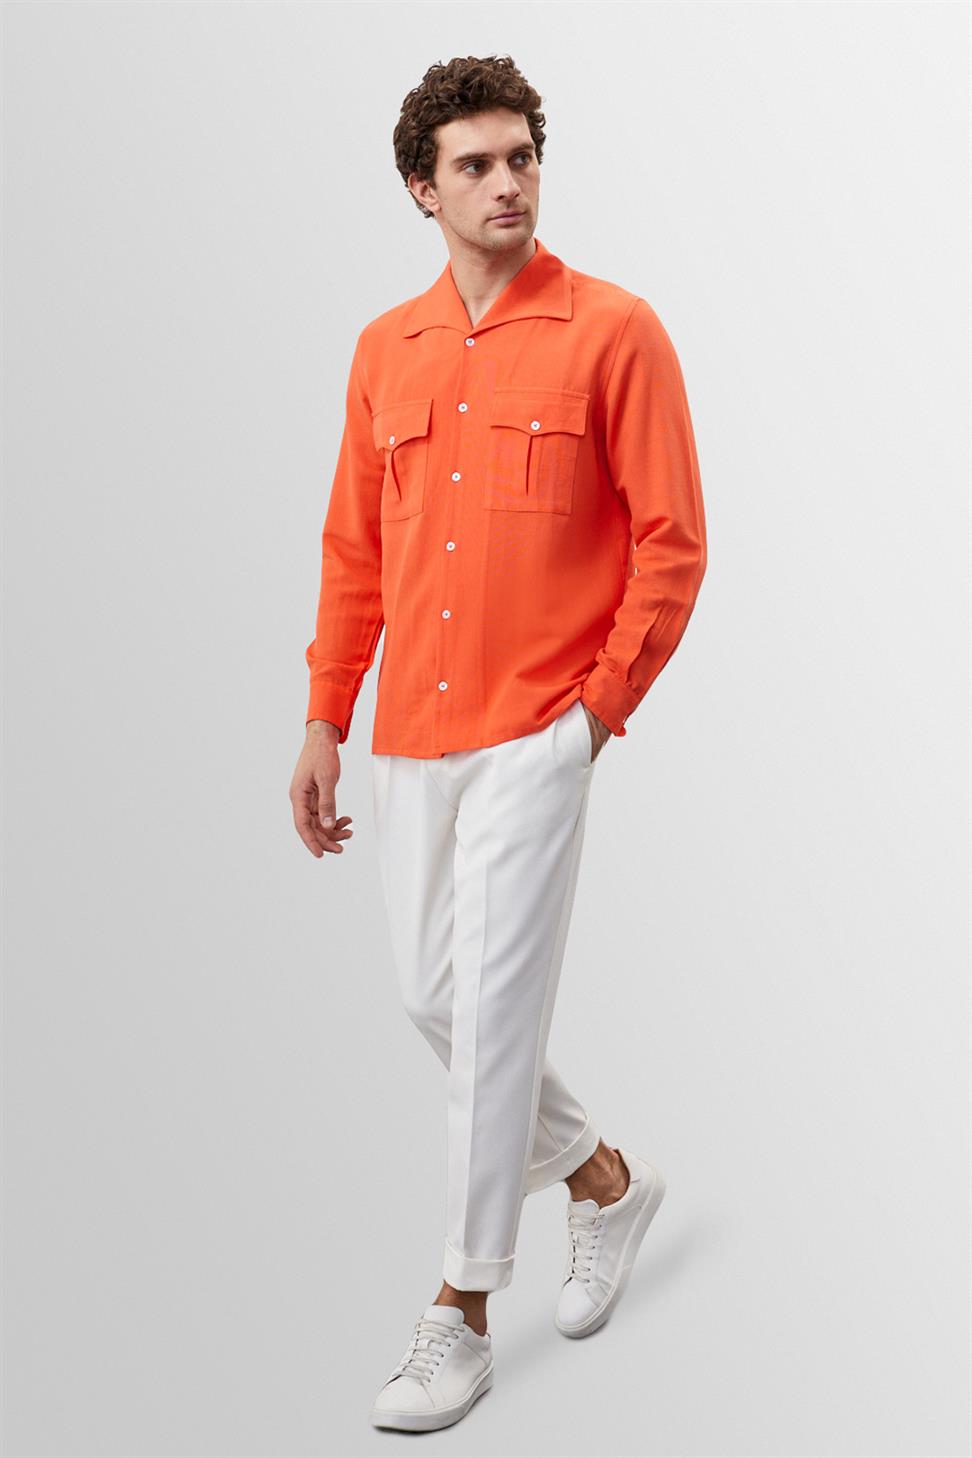 Orange jacket with white trousers - No Fear of Fashion